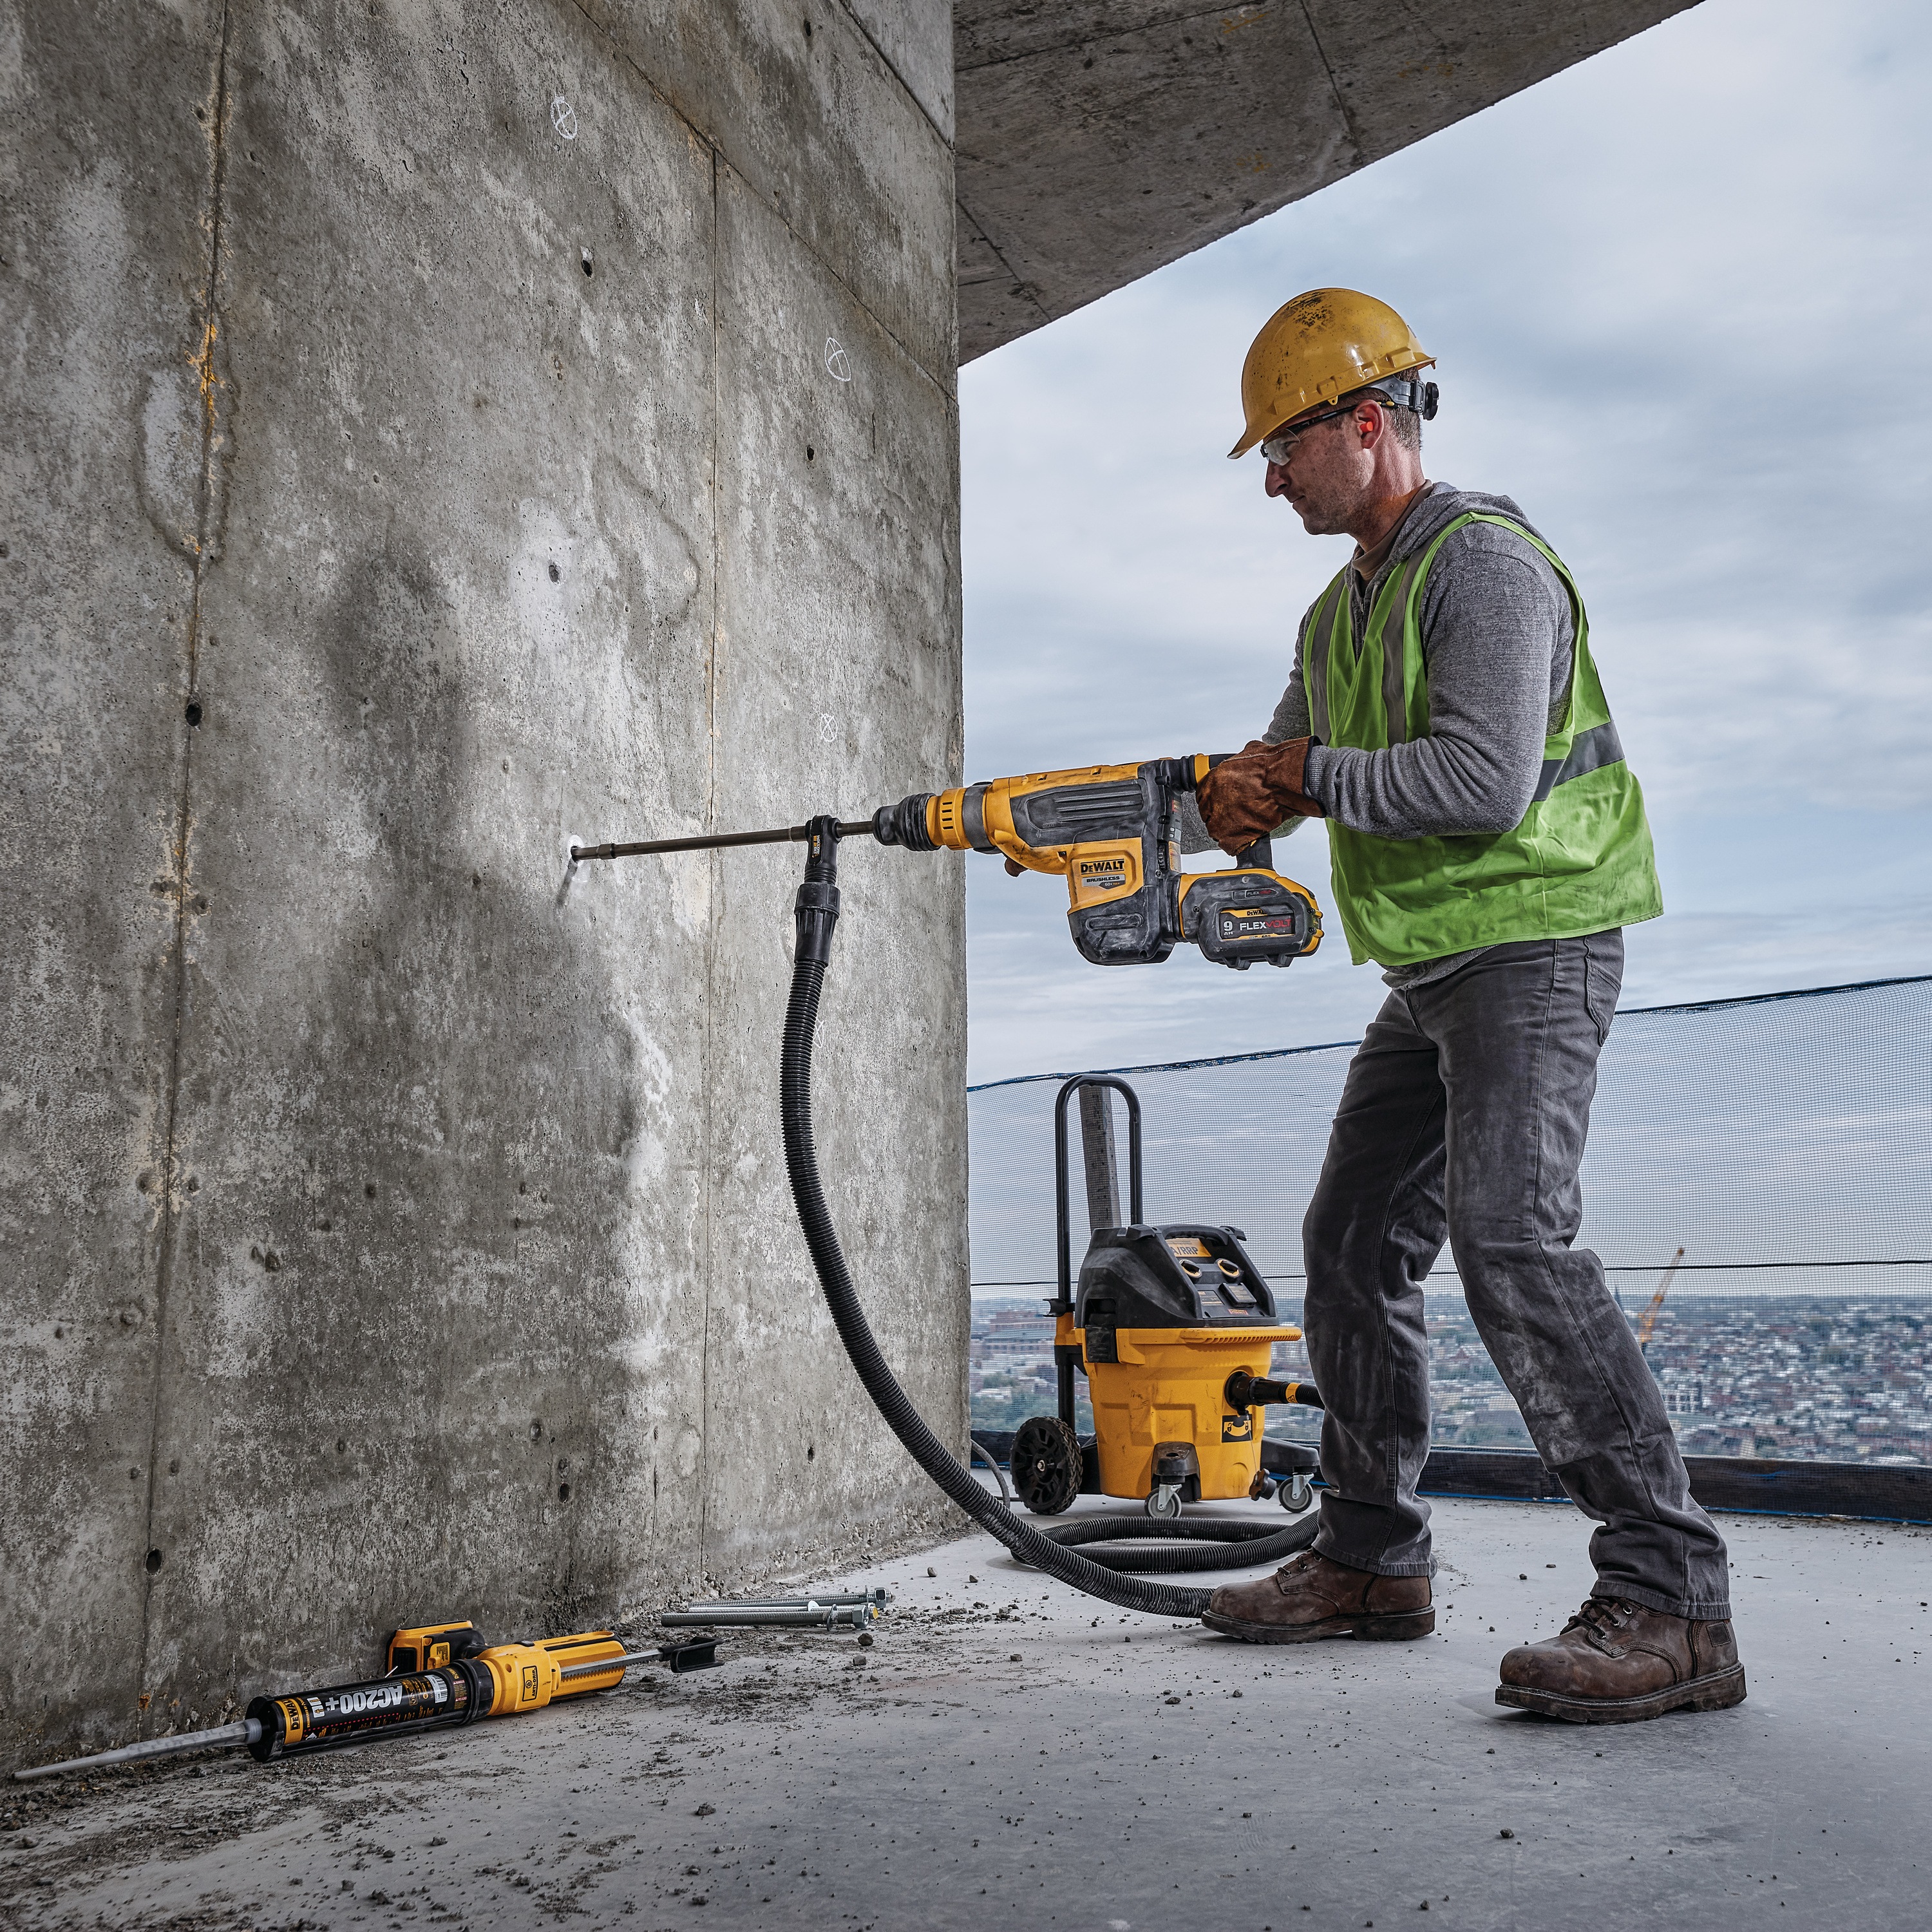 Brushless, cordless SDS MAX combination rotary hammer being used by a person at high rise construction site